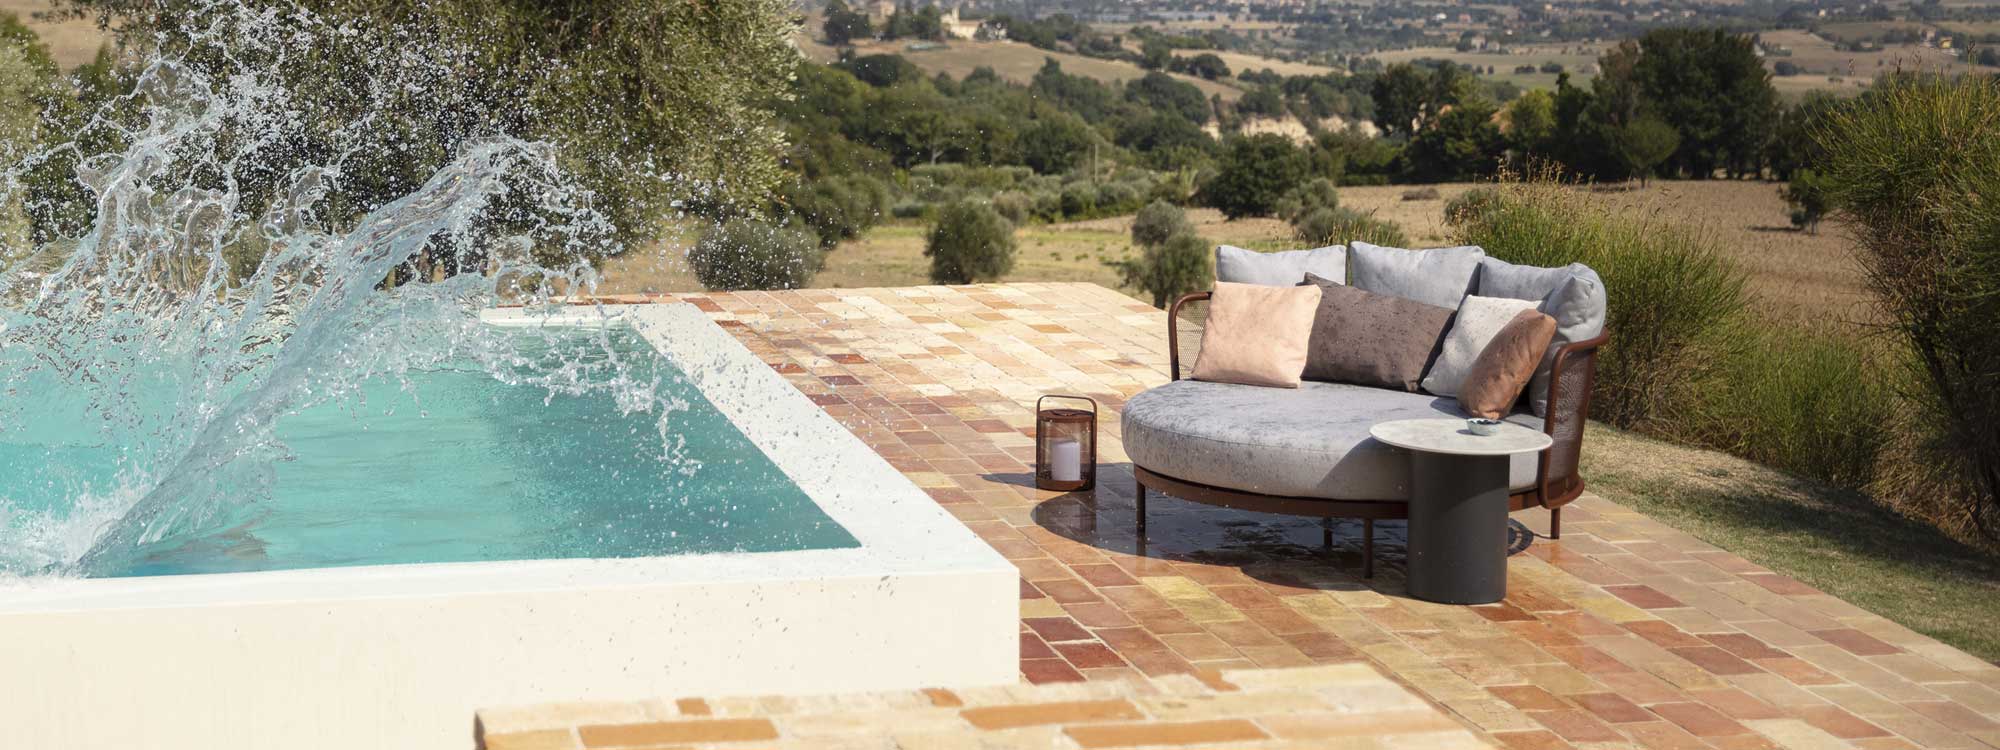 Splashes from swimming pool wet the Baza minimalist garden daybed, with Portuguese countryside in background